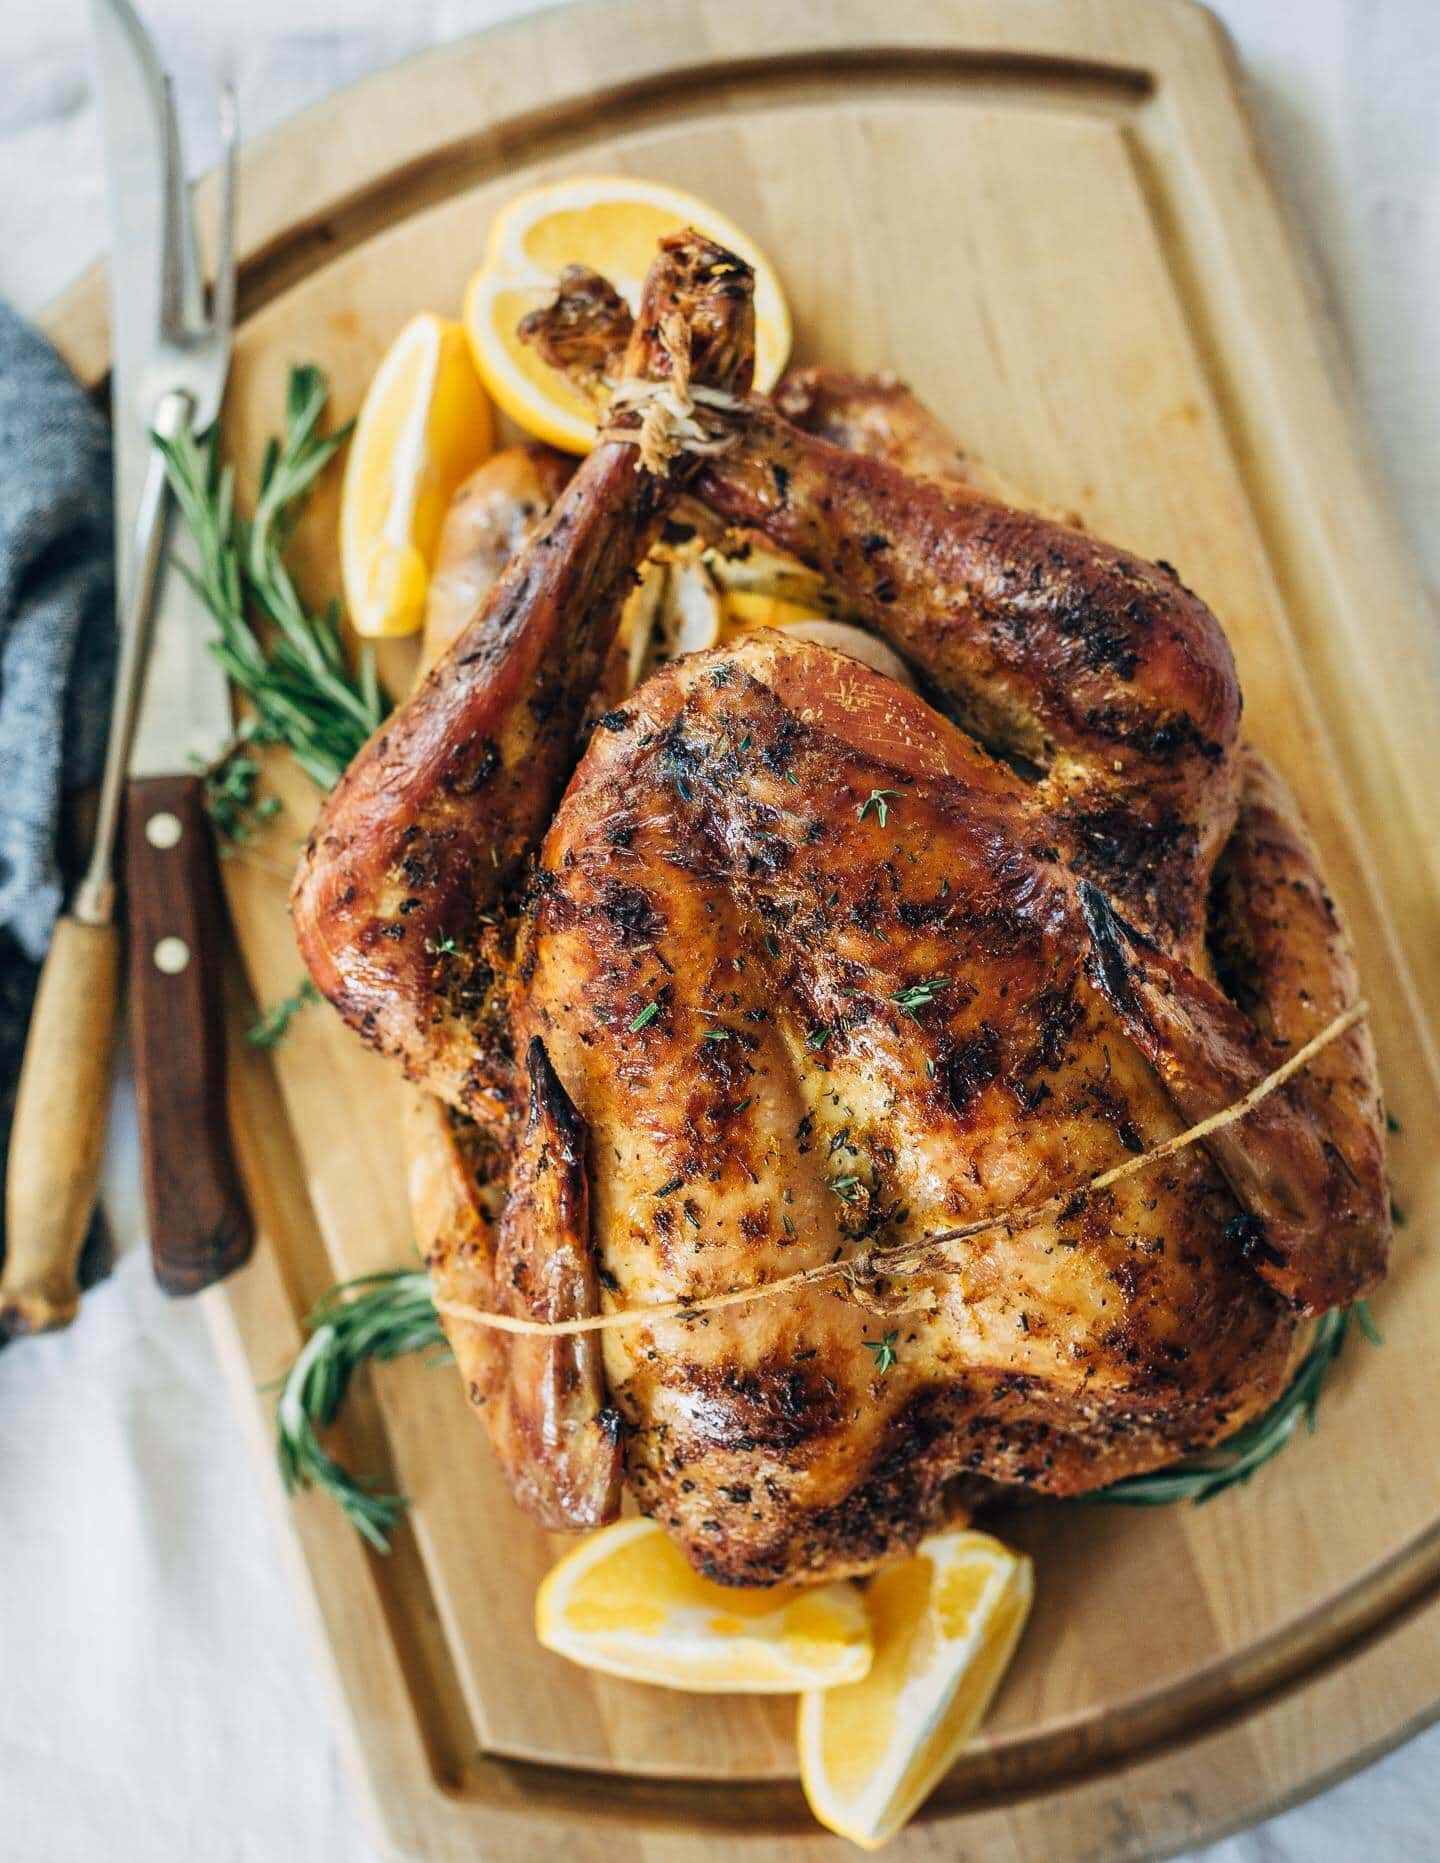 Orange and Rosemary Roasted Turkey  with slice lemon and fresh rosemary on a wooden board